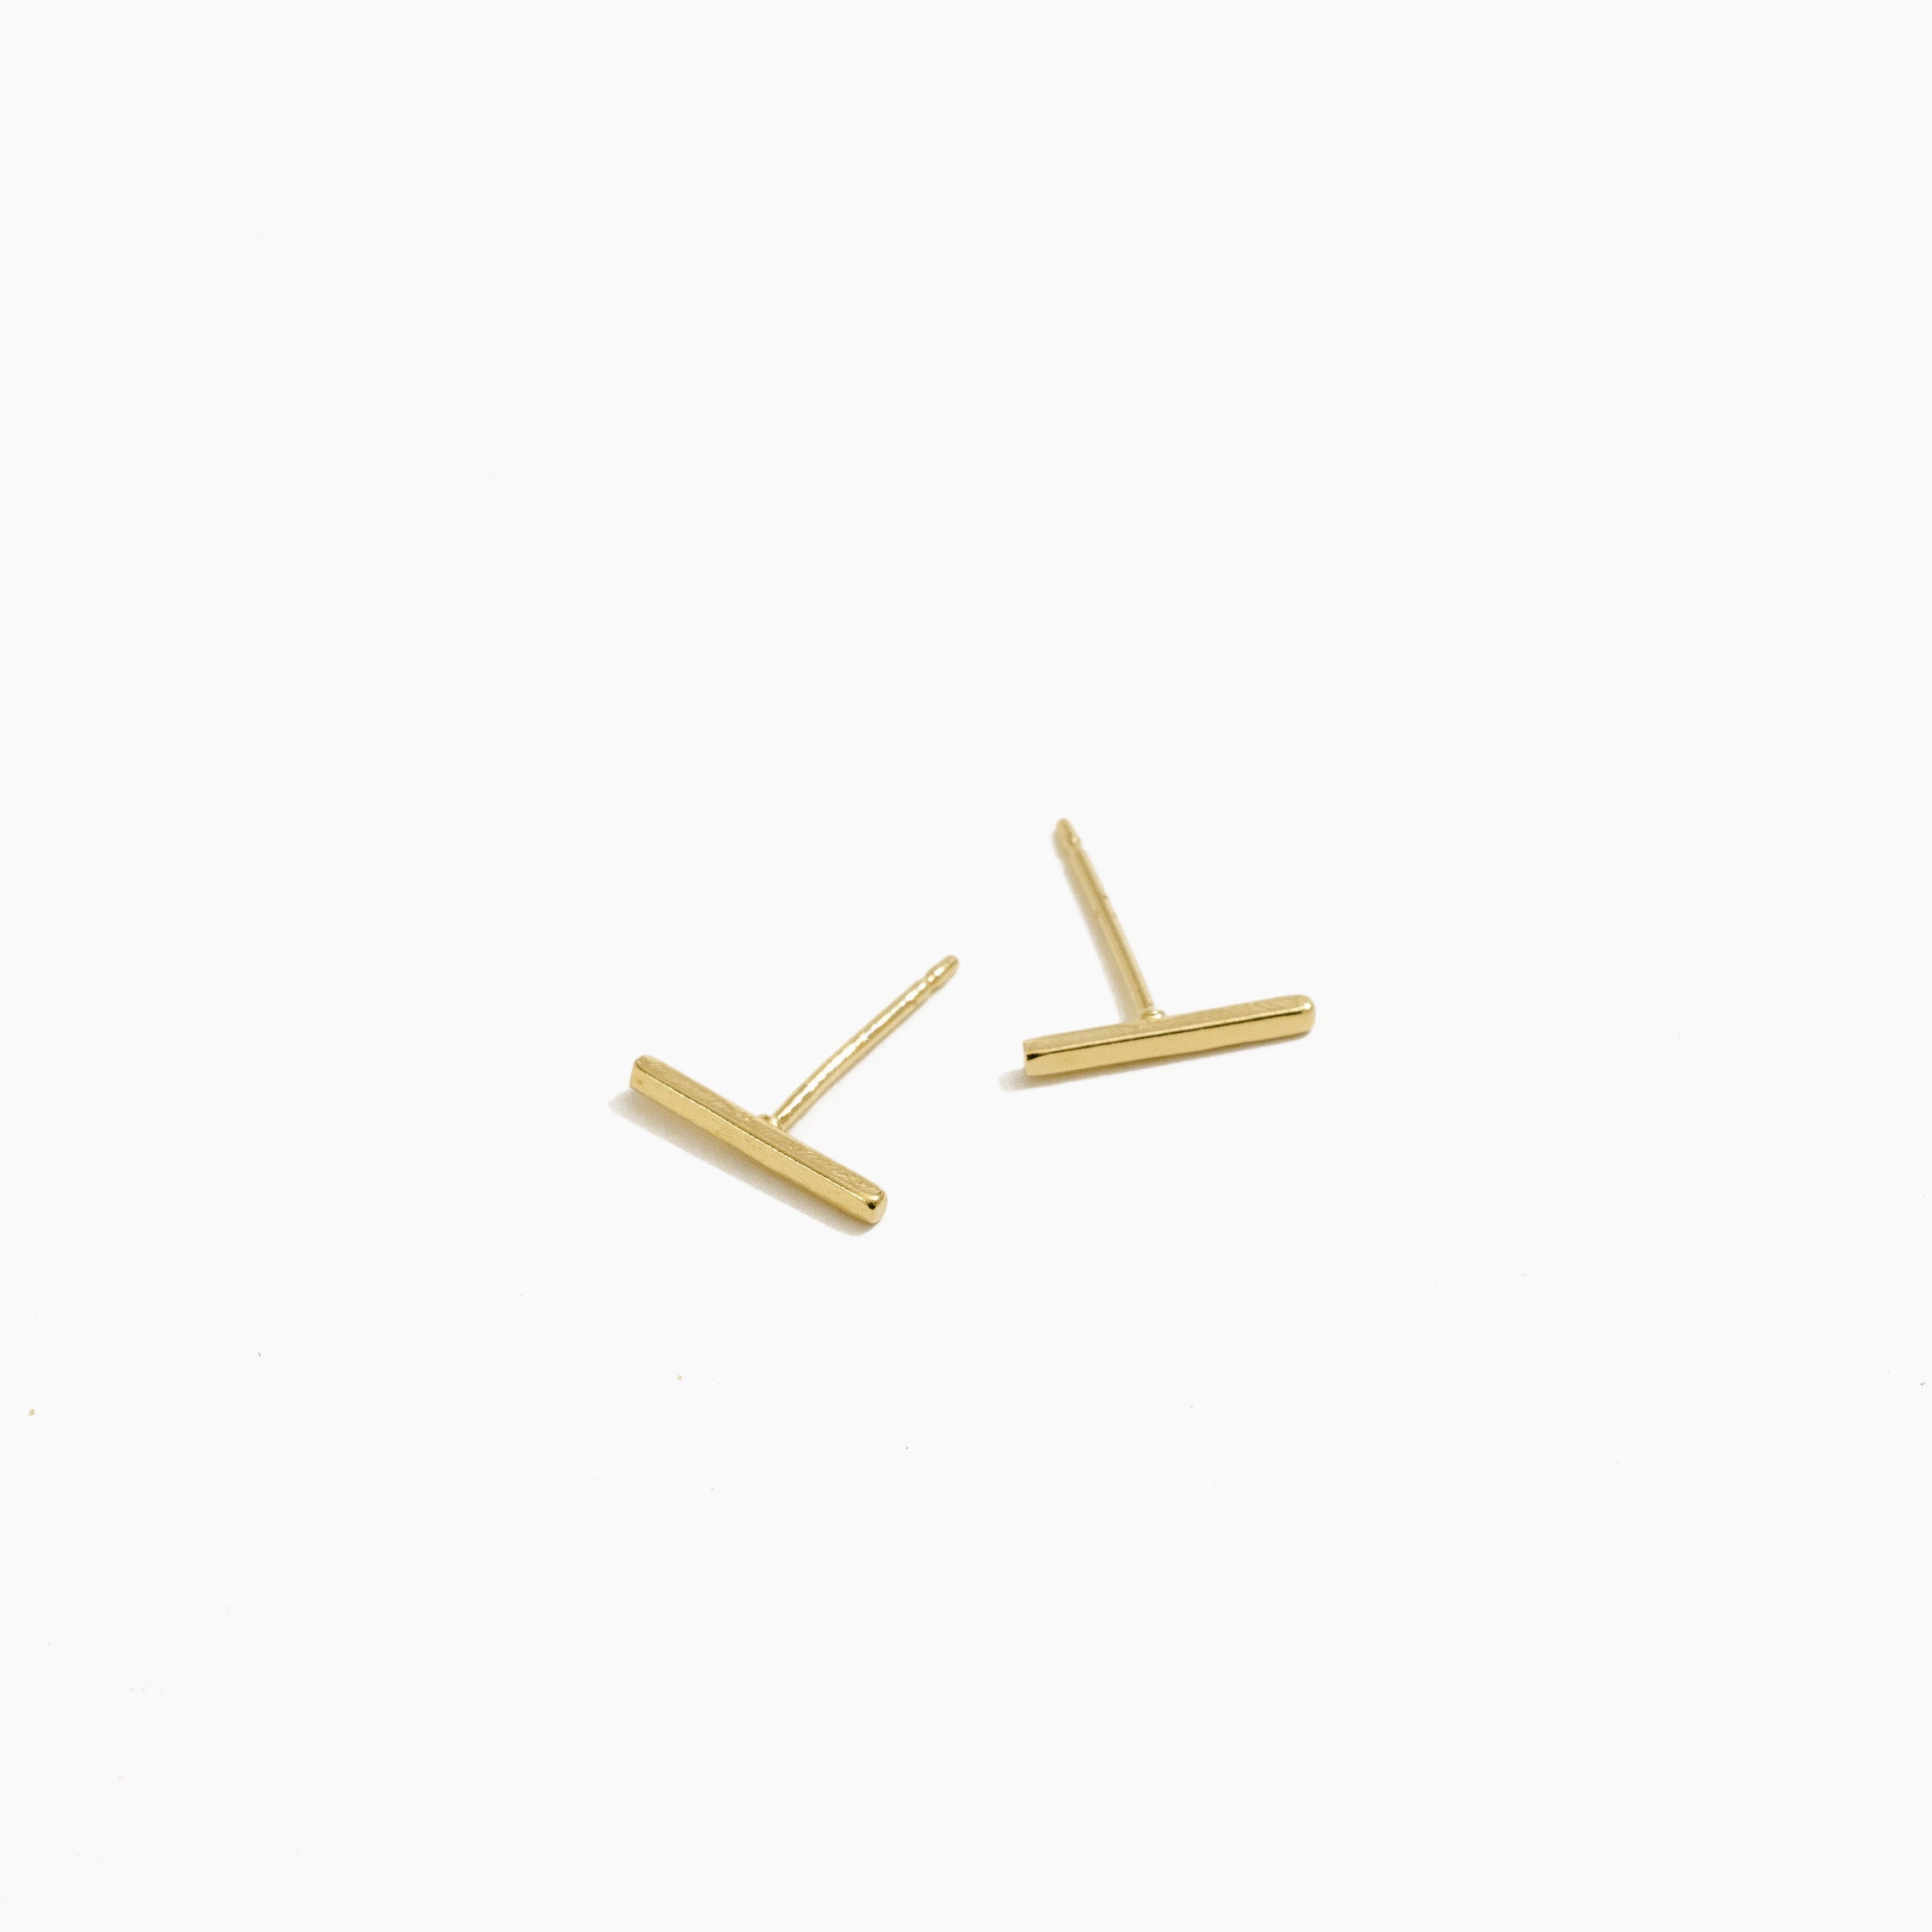 The Bar Studs, handmade in America by Katie Dean Jewelry. Nickel free and hypoallergenic.